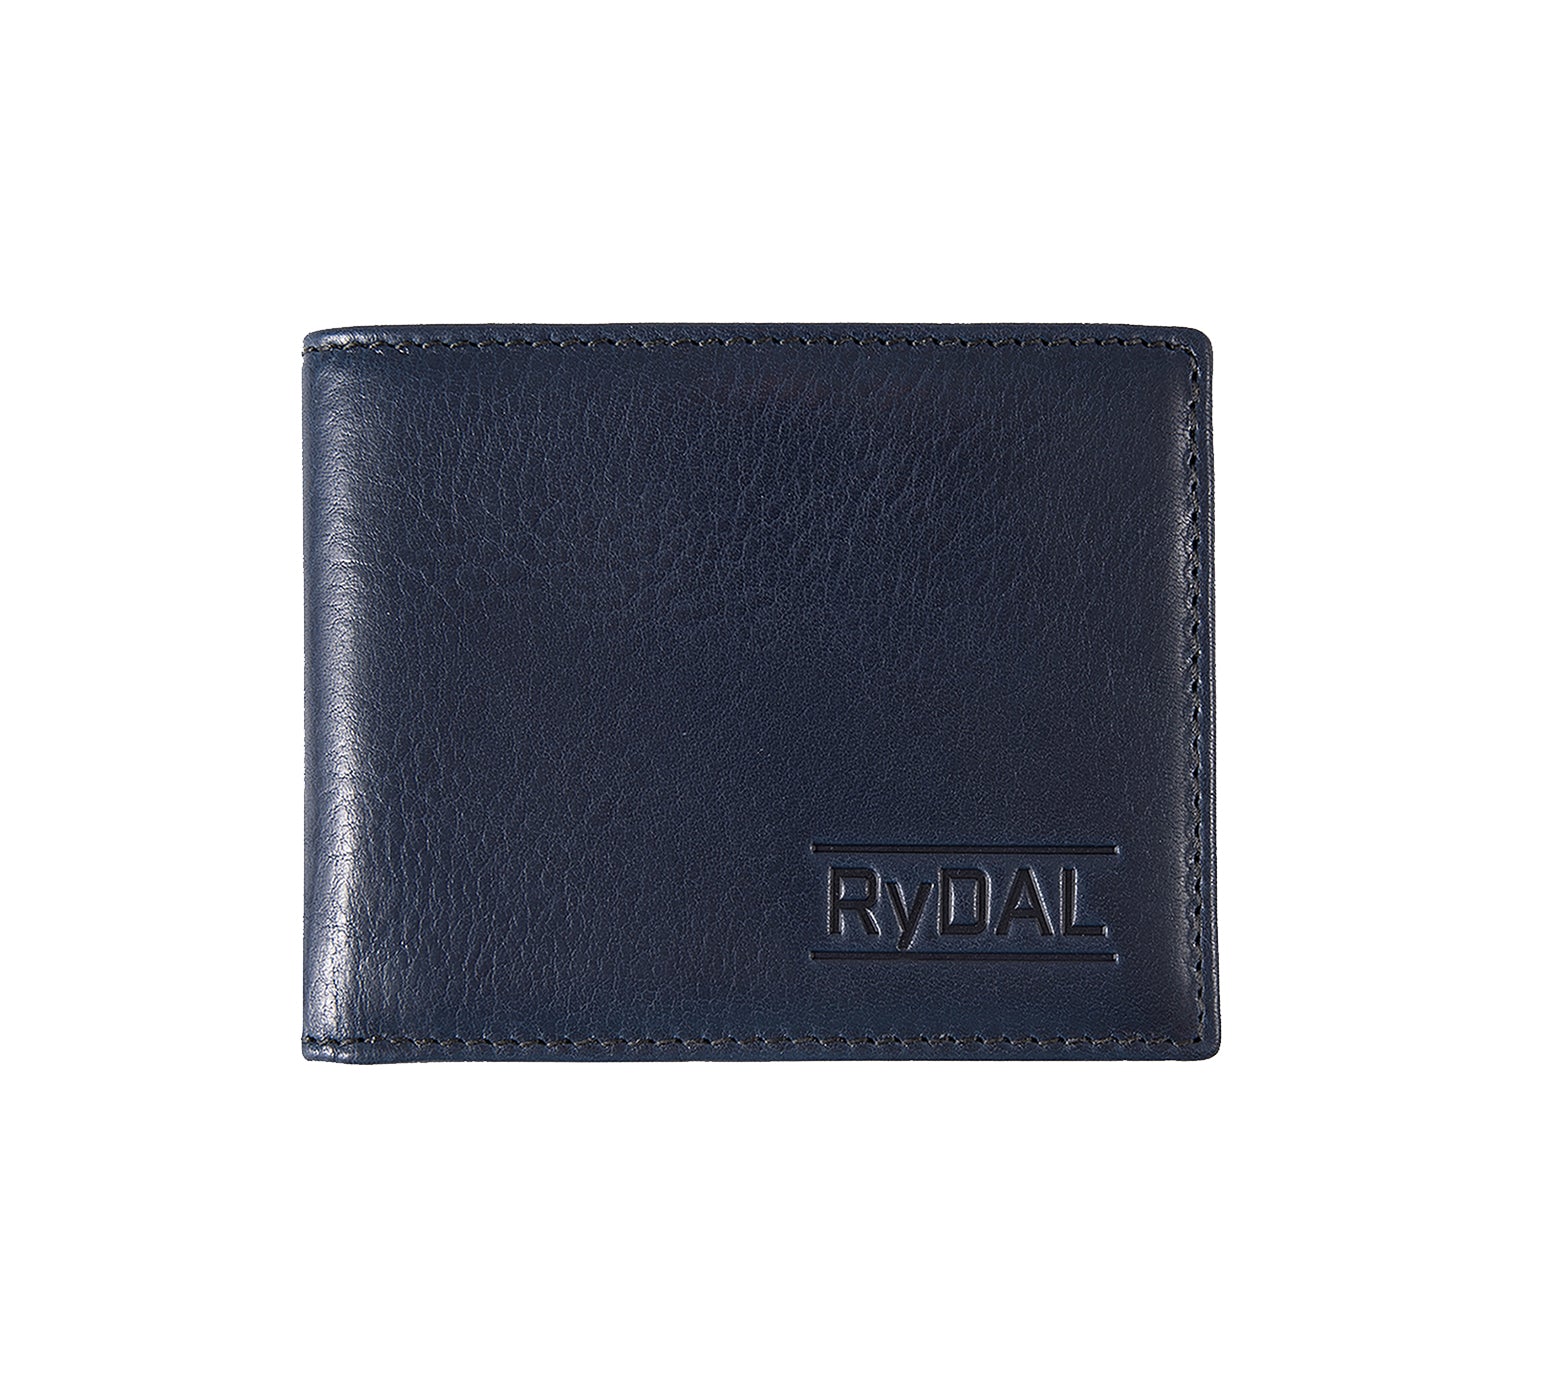 Mens Leather Wallet from Rydal in 'Royal Blue/Black'.